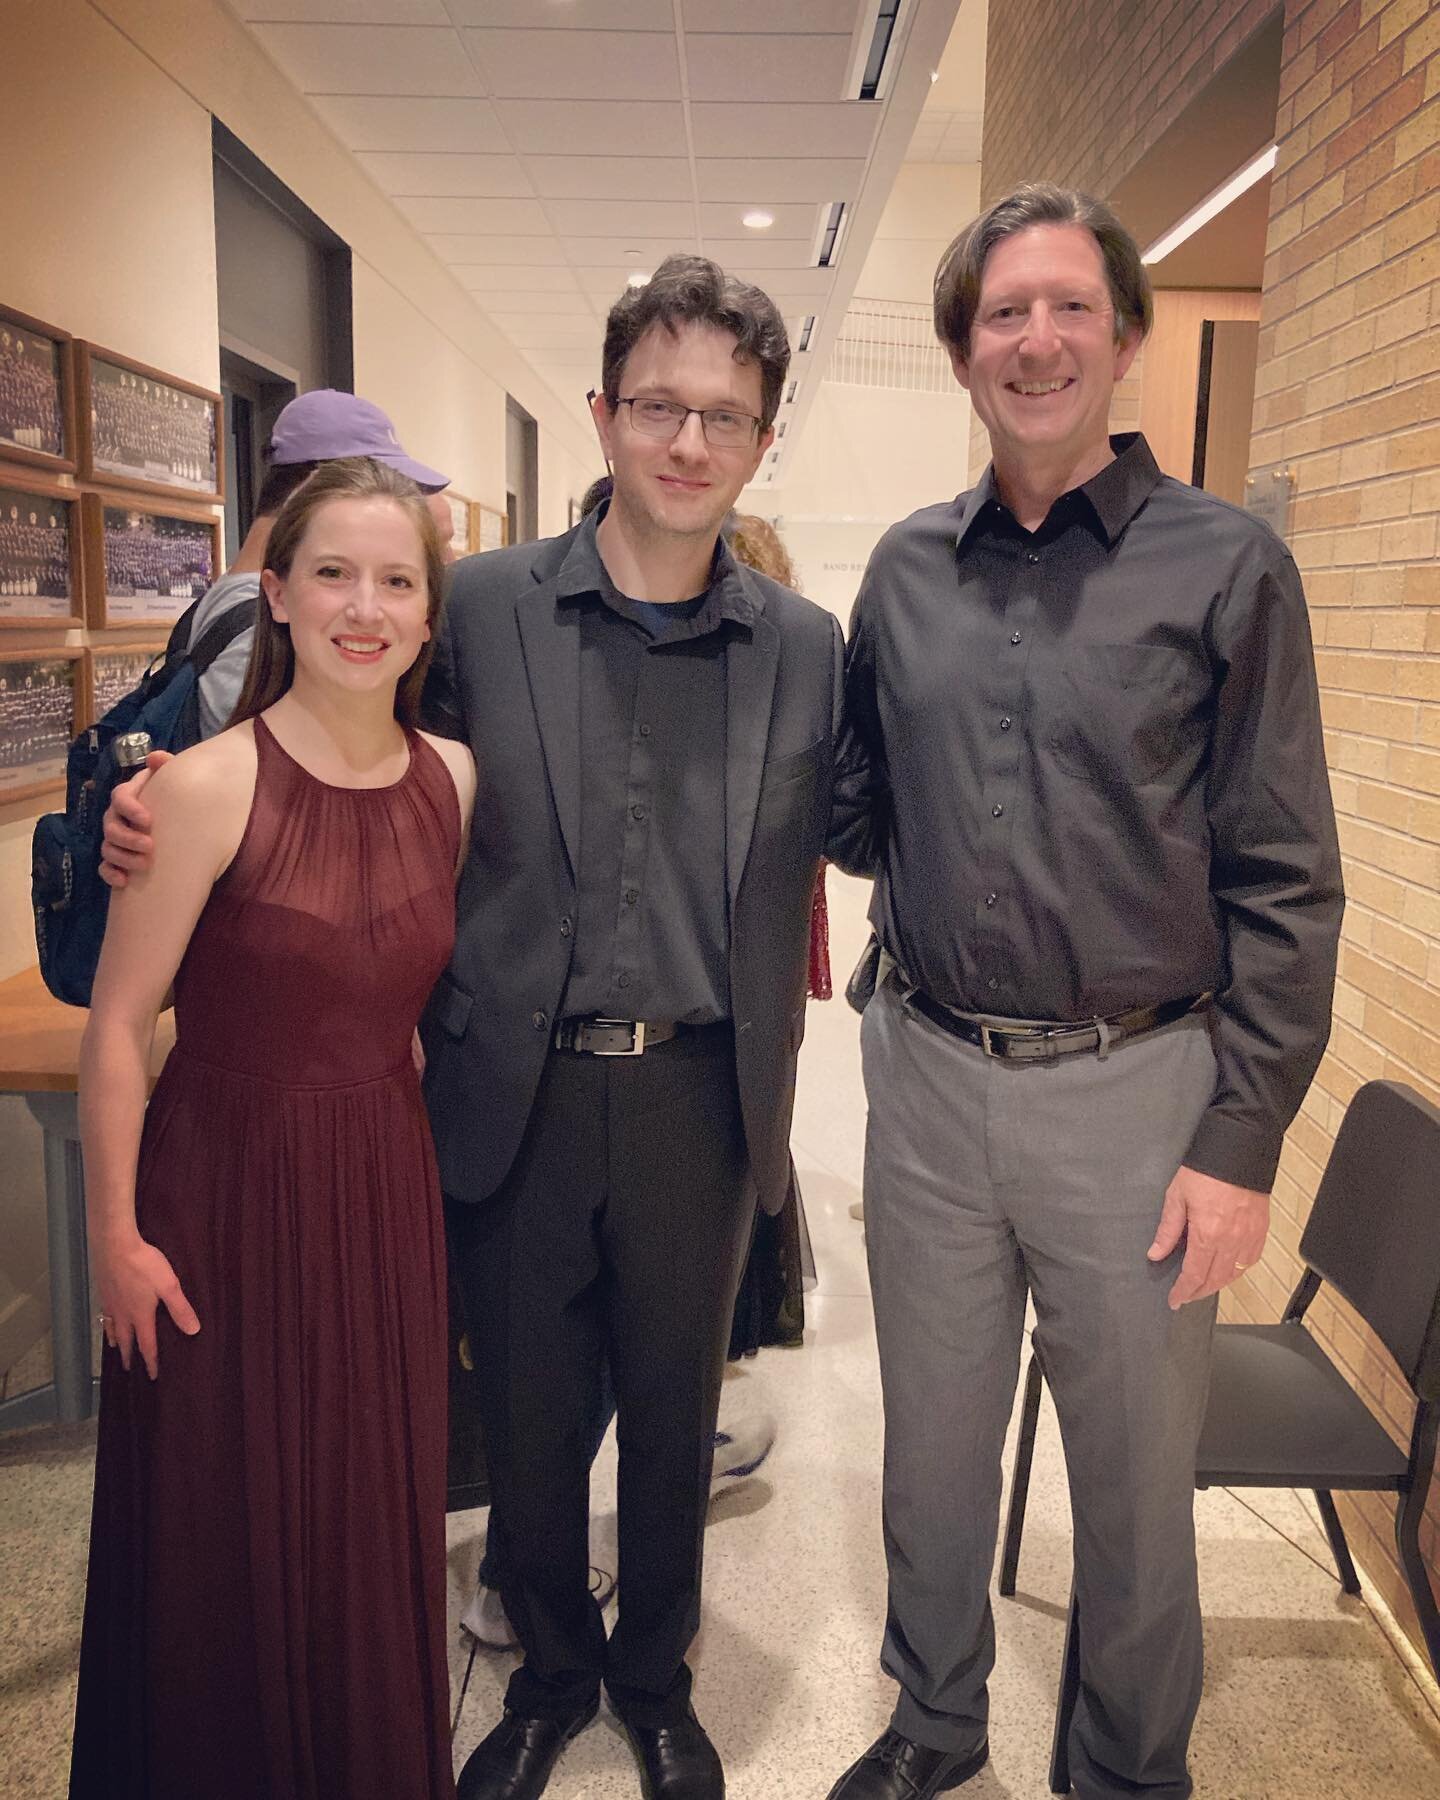 The premiere of my &lsquo;Souvenirs de Paris&rsquo; was fantastic, thanks to the virtuosity and emotionality of these two wonderful musicians. Thank you Juliette Herlin and Michael Bukhman for your heartfelt performance! #virtuoso #newmusic #cello #p